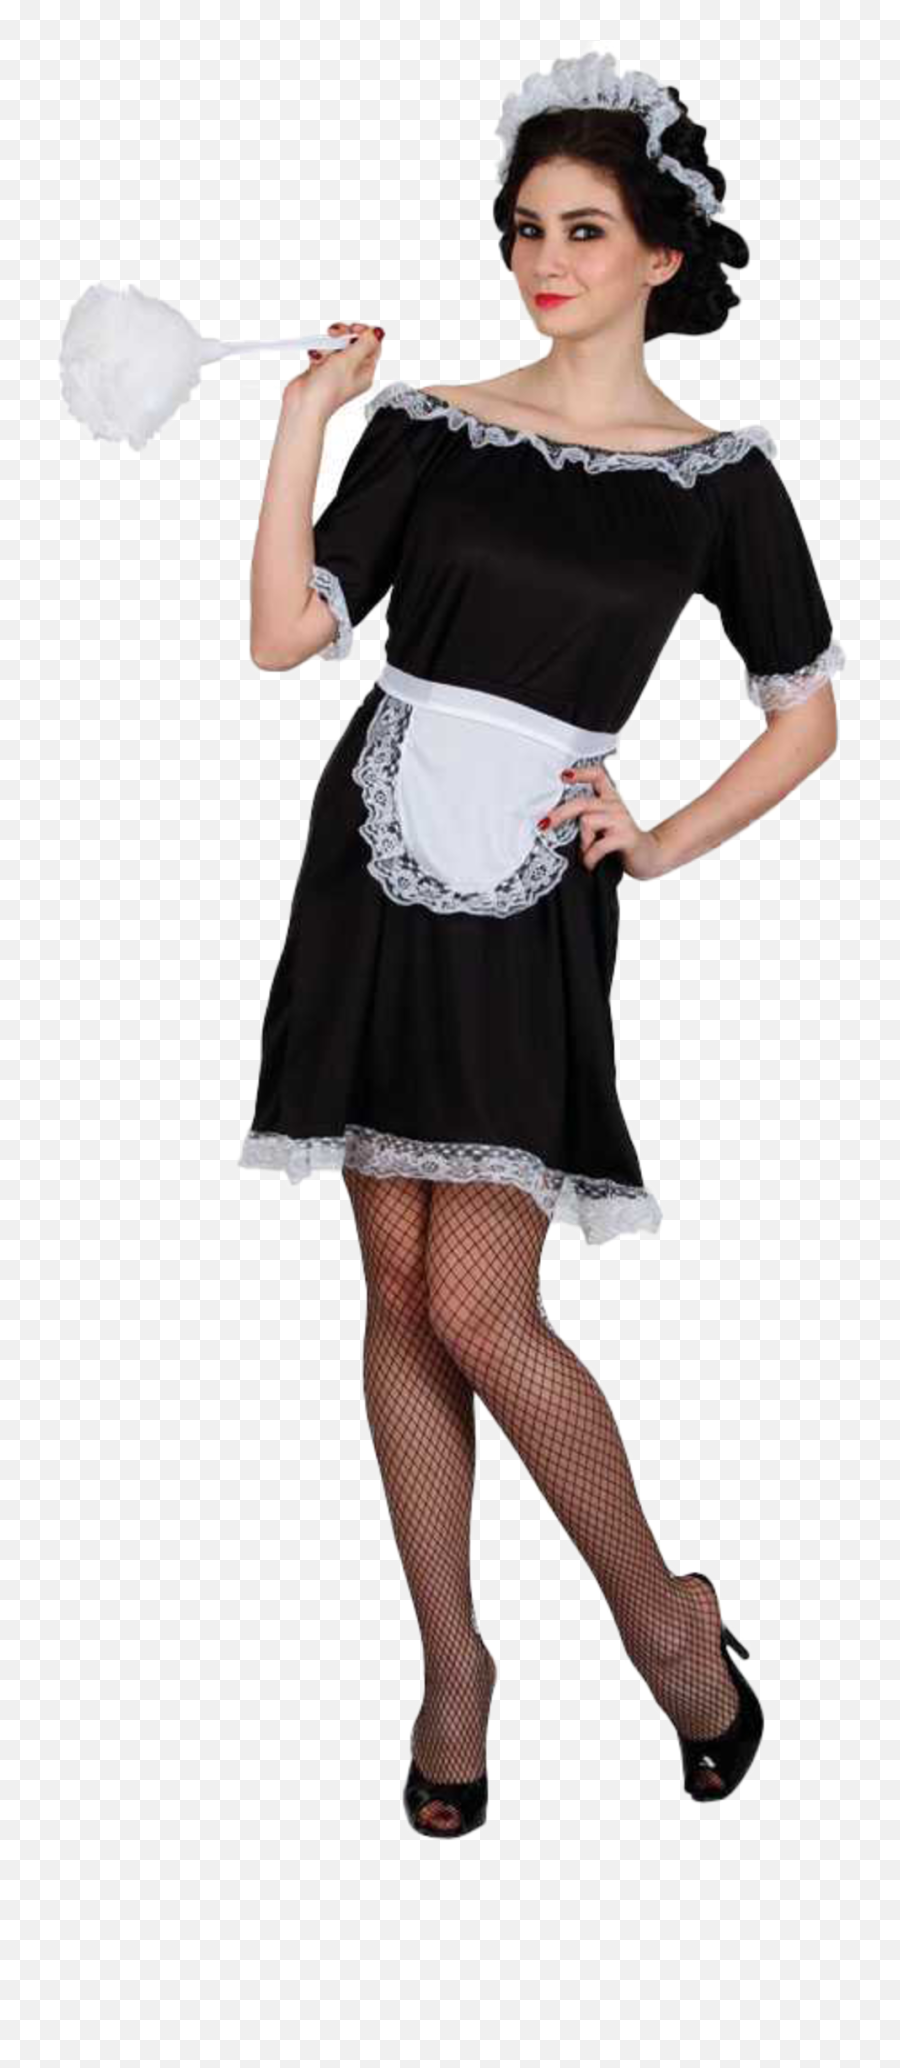 Maid Halloween Costumes Png U0026 Free Maid Halloween Costumes - Classic French Maids Outfit Emoji,Emoji Halloween Costumes